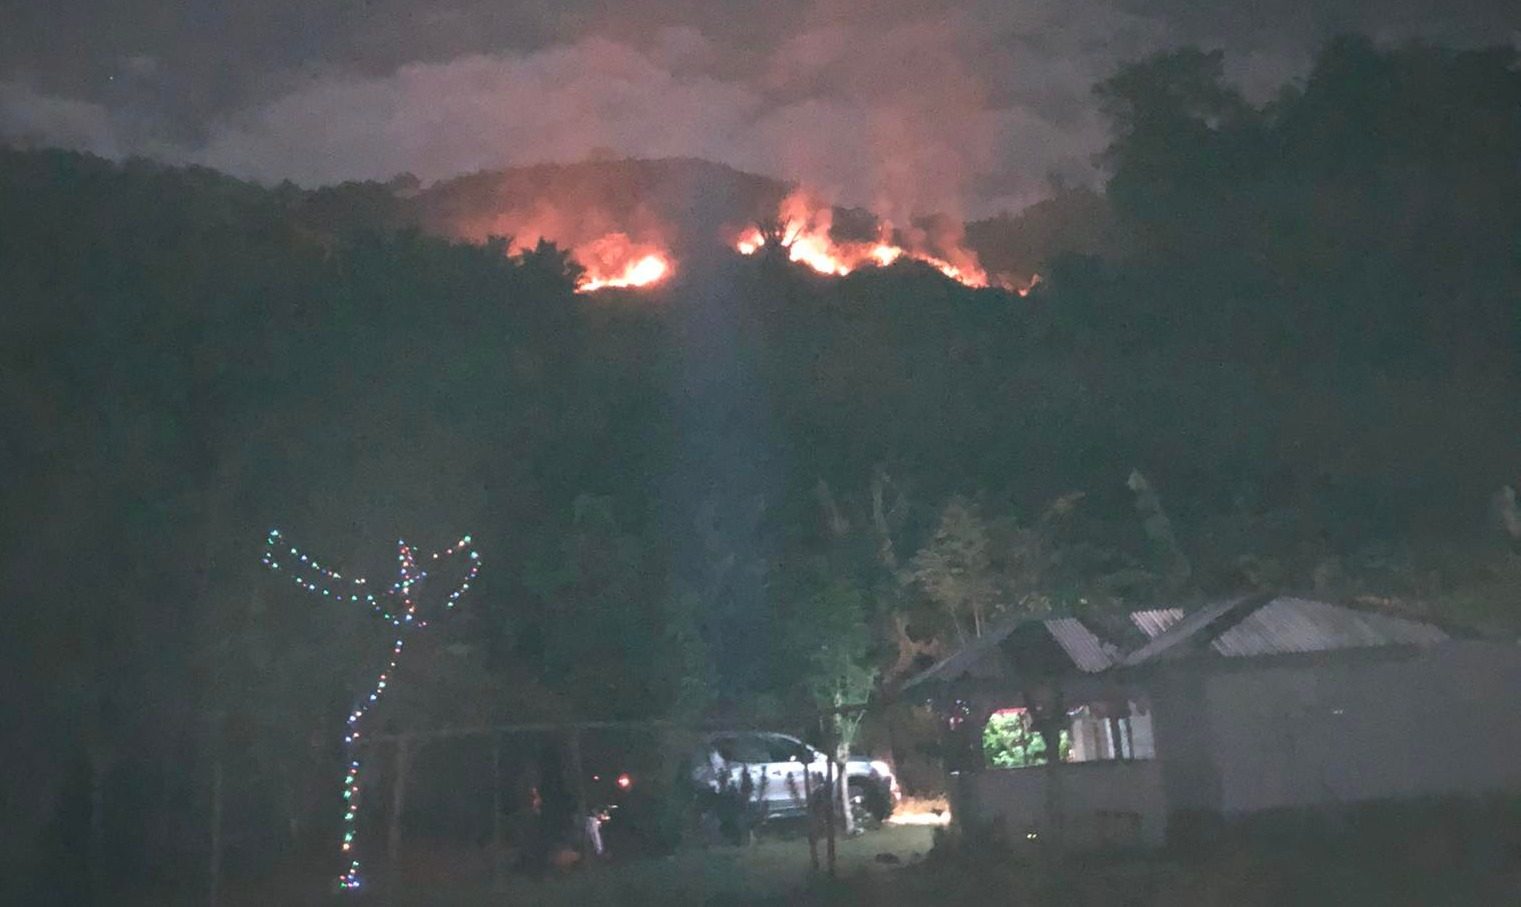 Officials warn of heightened dry spell risks as fire ravages Quezon grassland